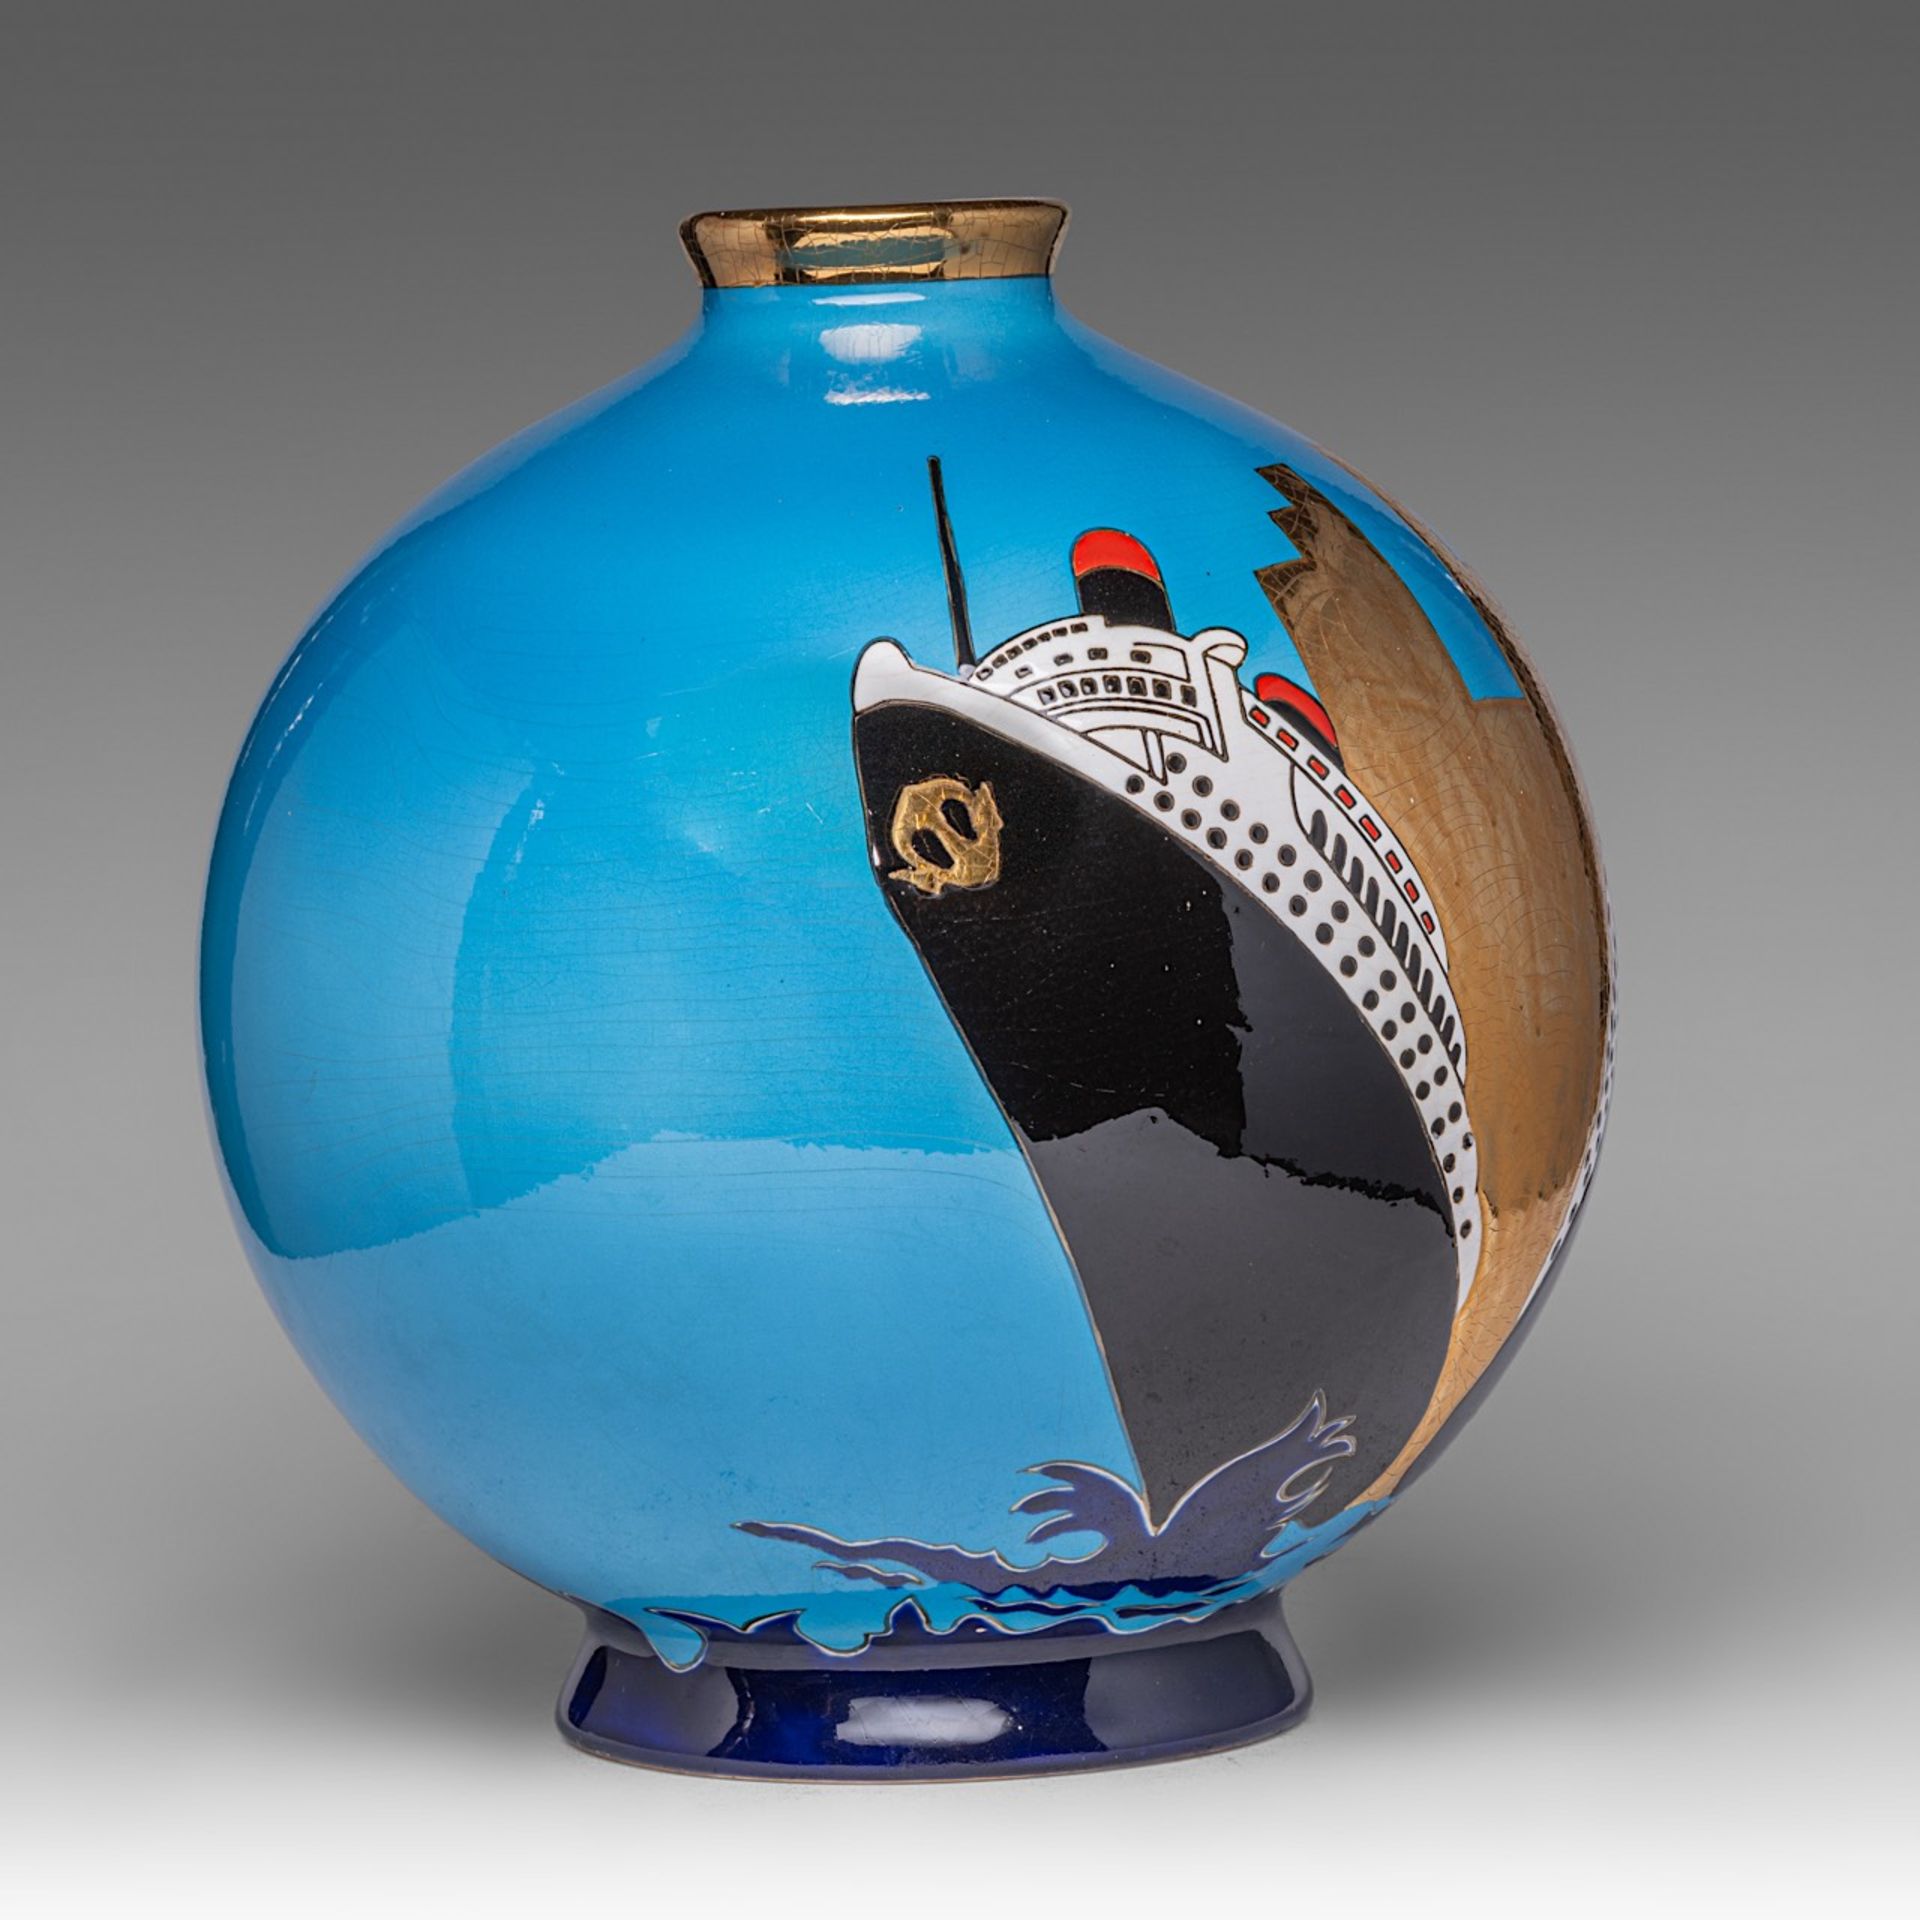 A large 'New York' circular vase by Longwy, limited edition, Ndeg 29/50, H 40 cm - Image 4 of 7